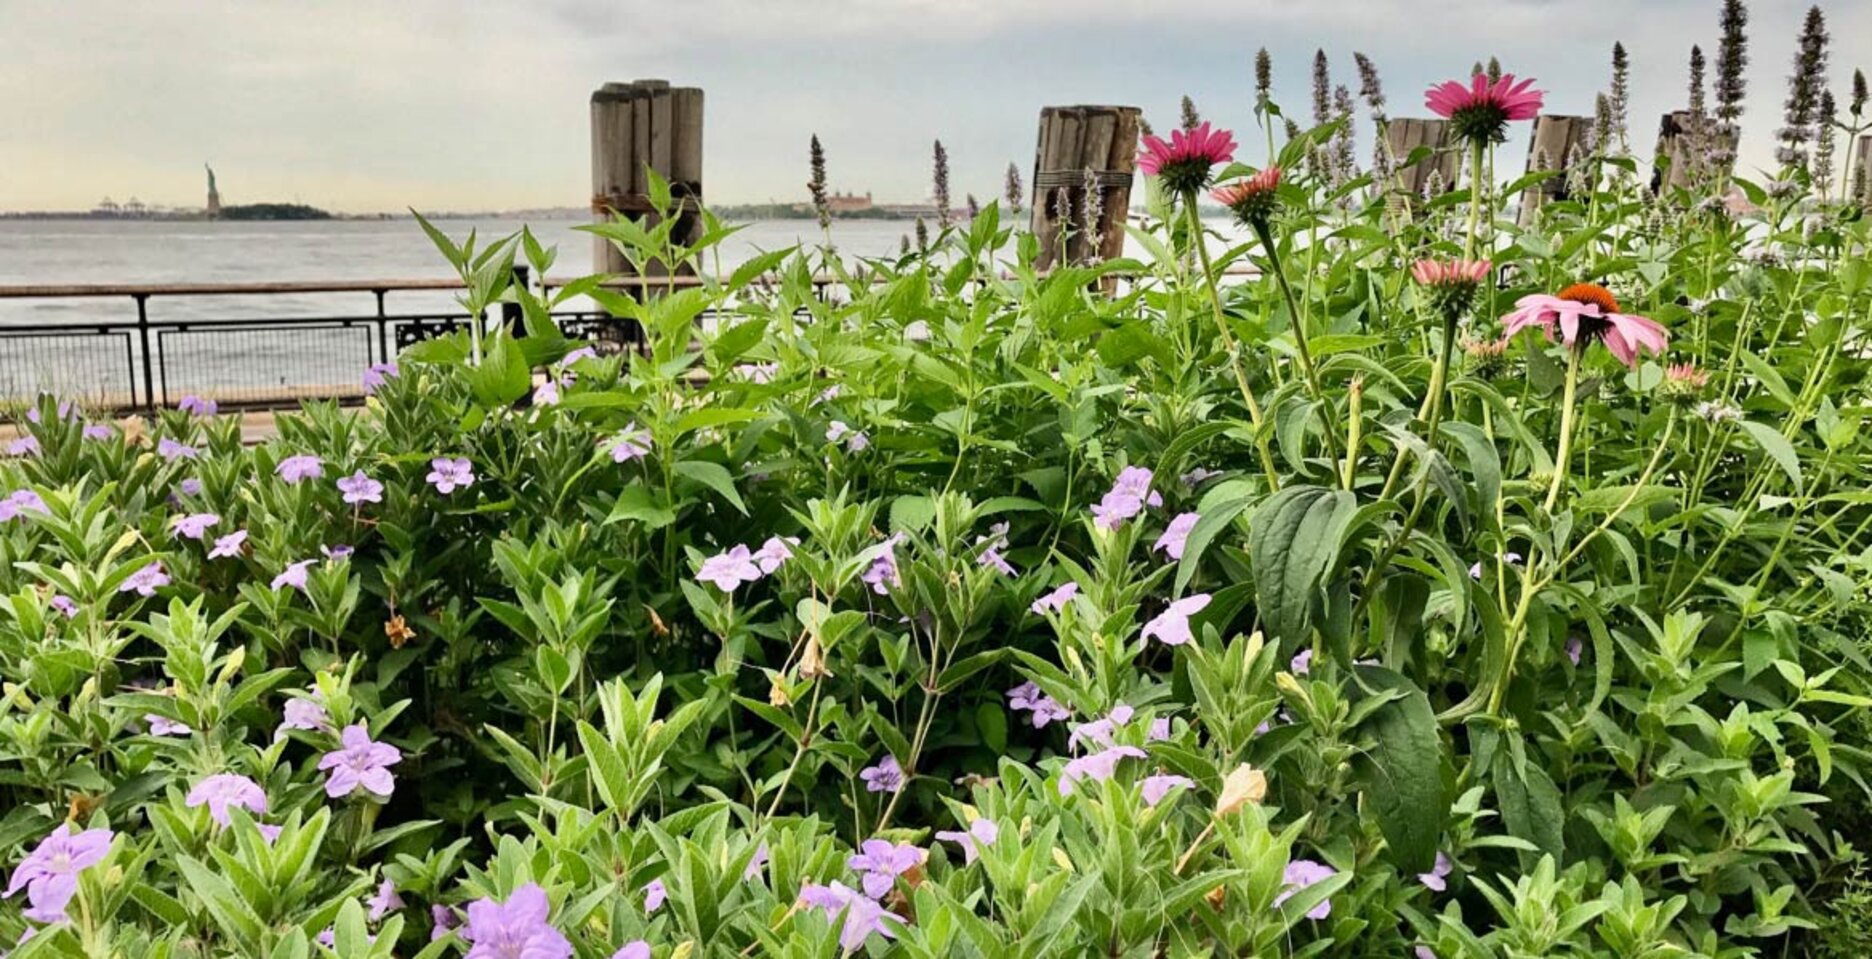 The Battery’s plantings and perennial gardens attract land birds while its position offers great views of the waterbirds and raptors over the lower harbor. Photo: The Battery Conservancy